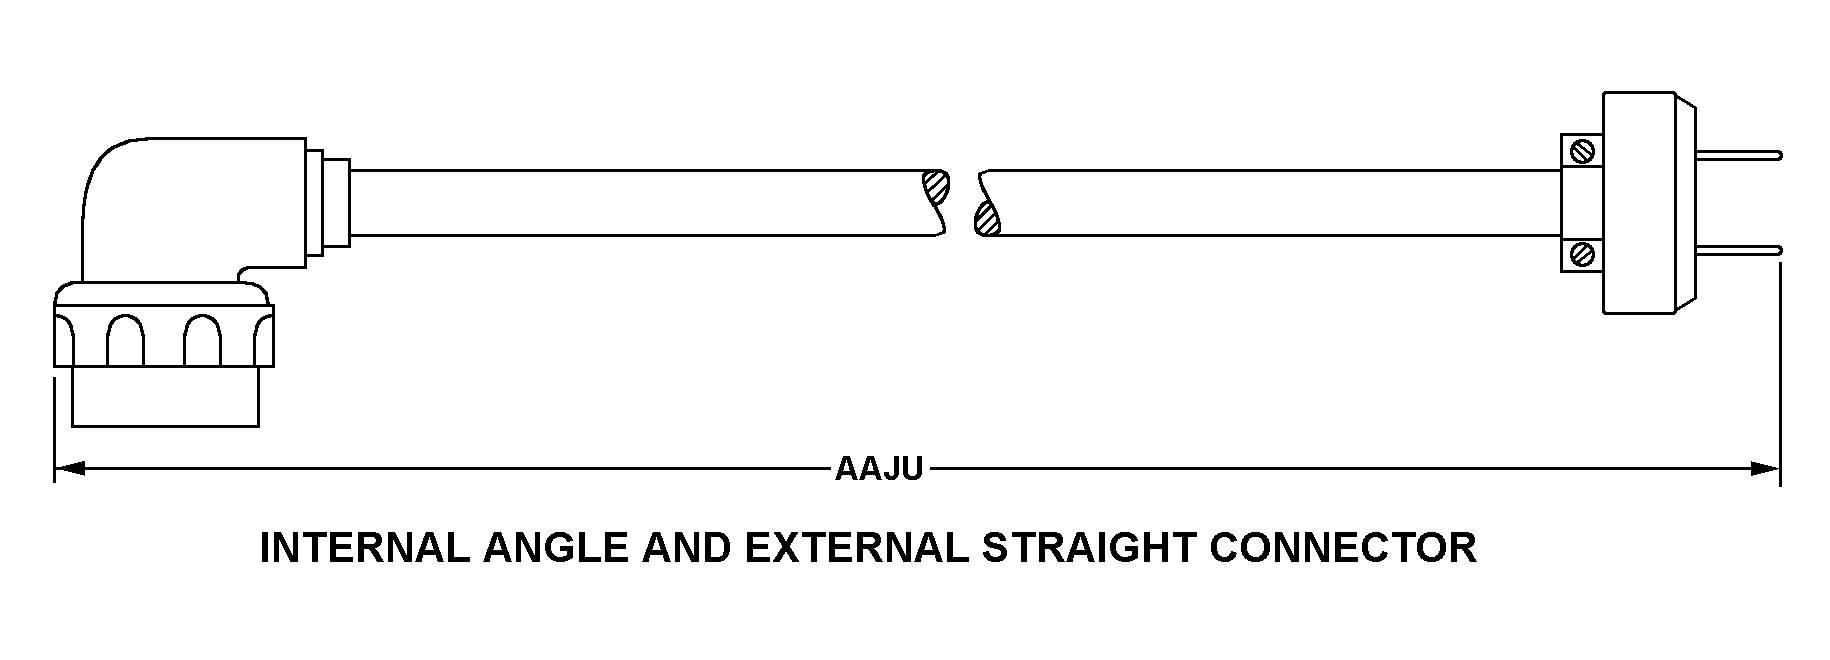 INTERNAL ANGLE AND EXTERNAL STRAIGHT CONNECTOR style nsn 5995-01-504-0794